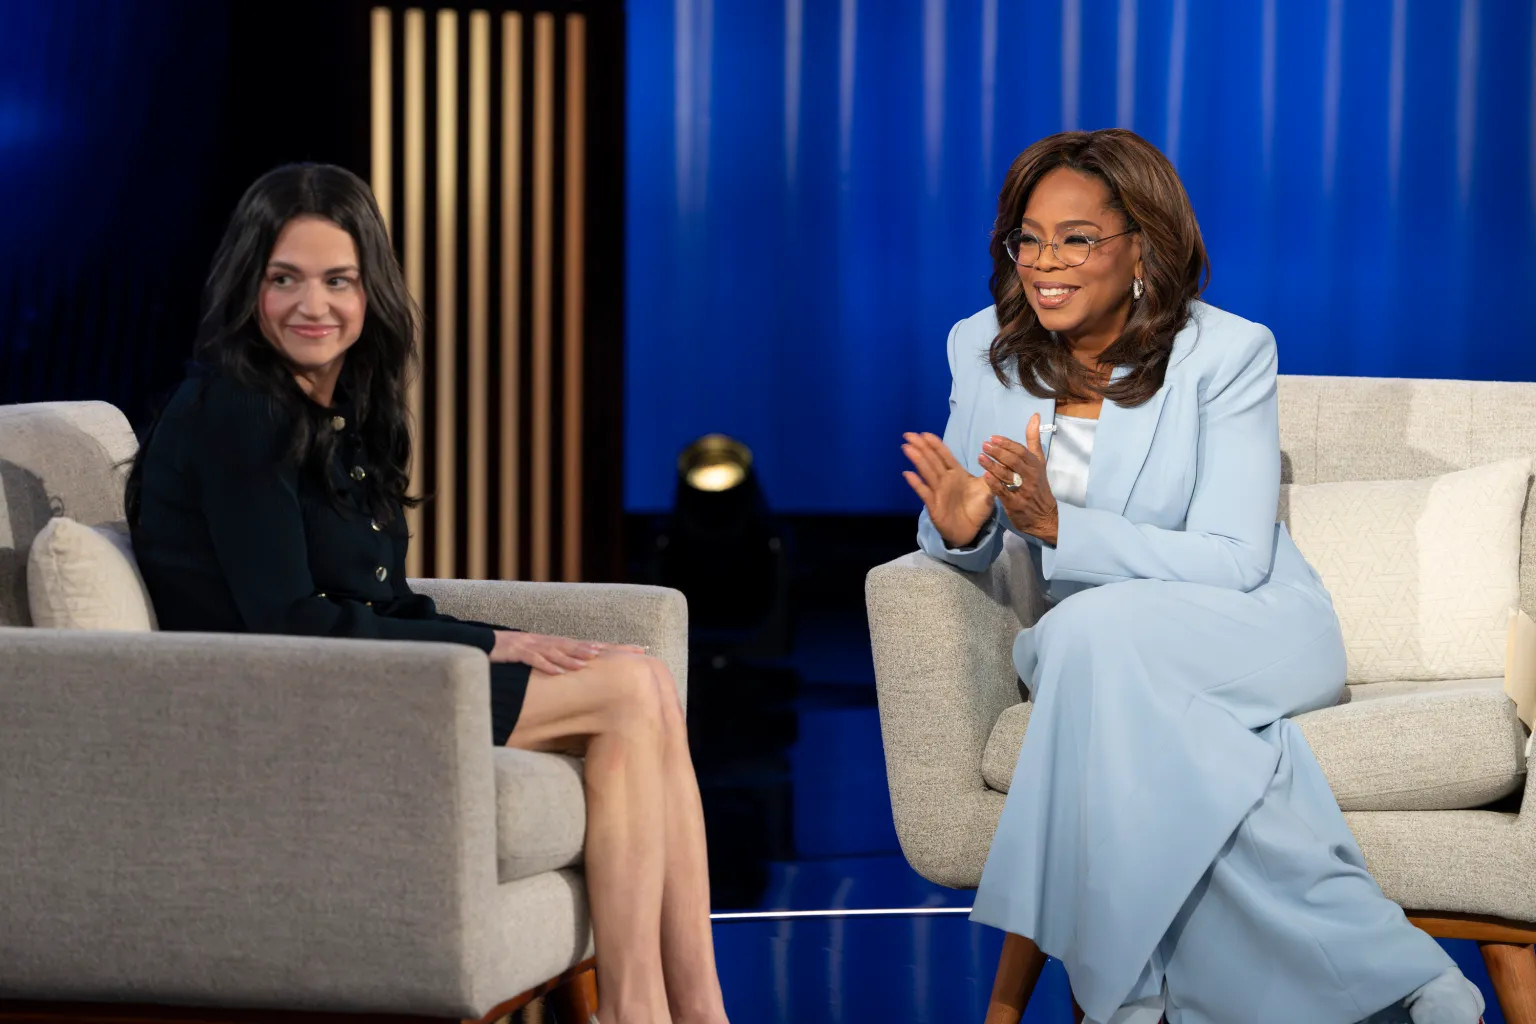 How to Watch Oprah Winfrey's 'Shame, Blame and the Weight Loss